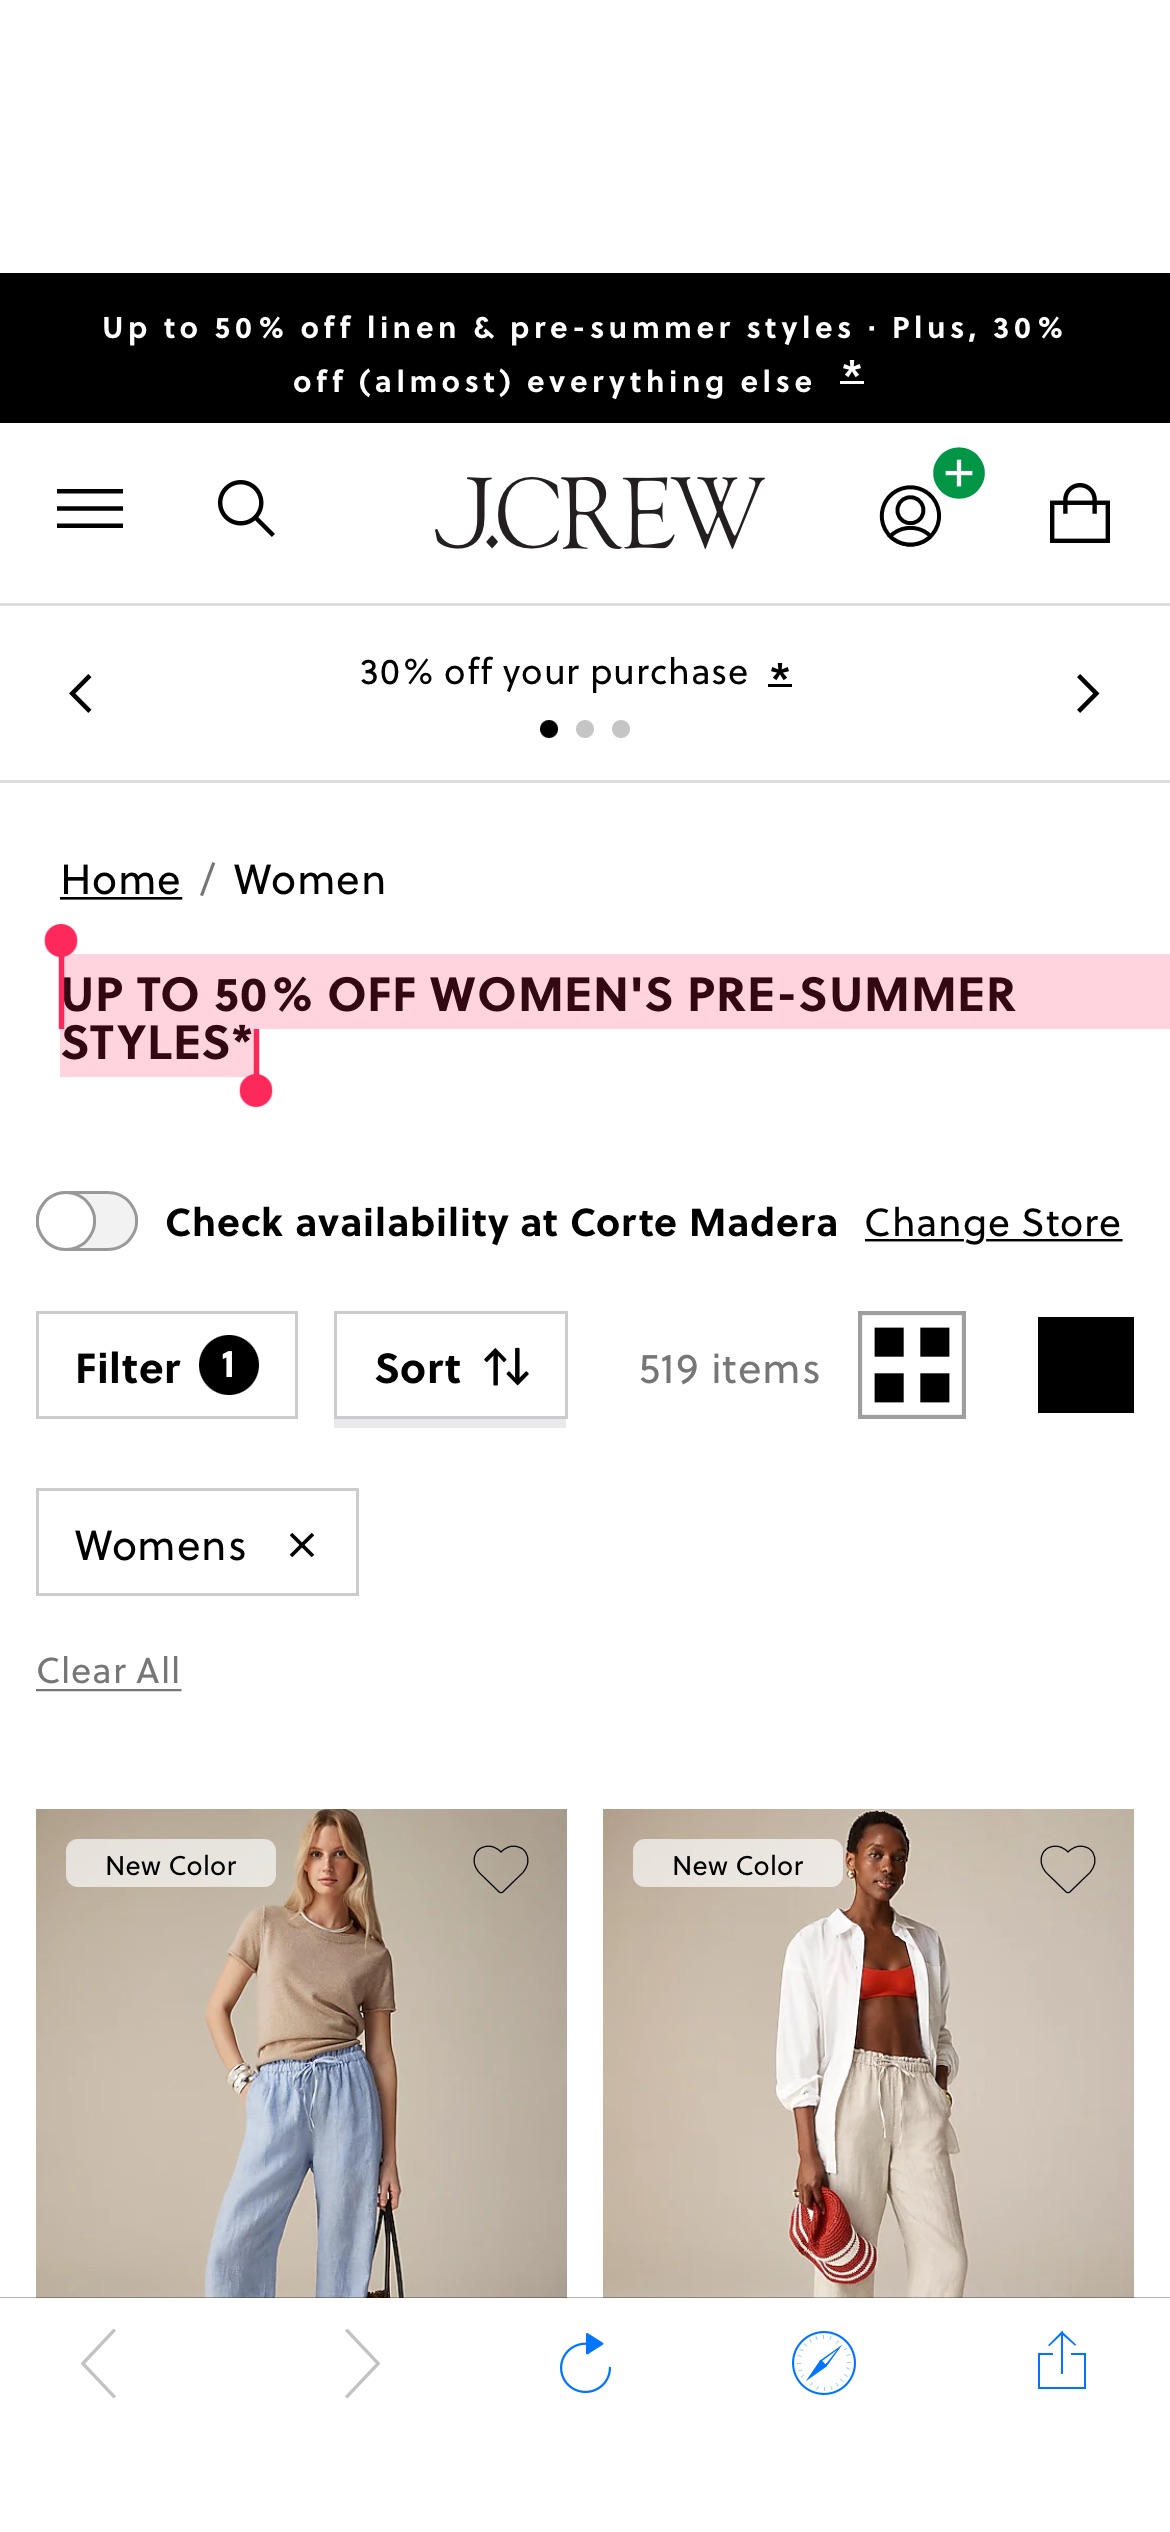 UP TO 50% OFF WOMEN'S PRE-SUMMER STYLES*